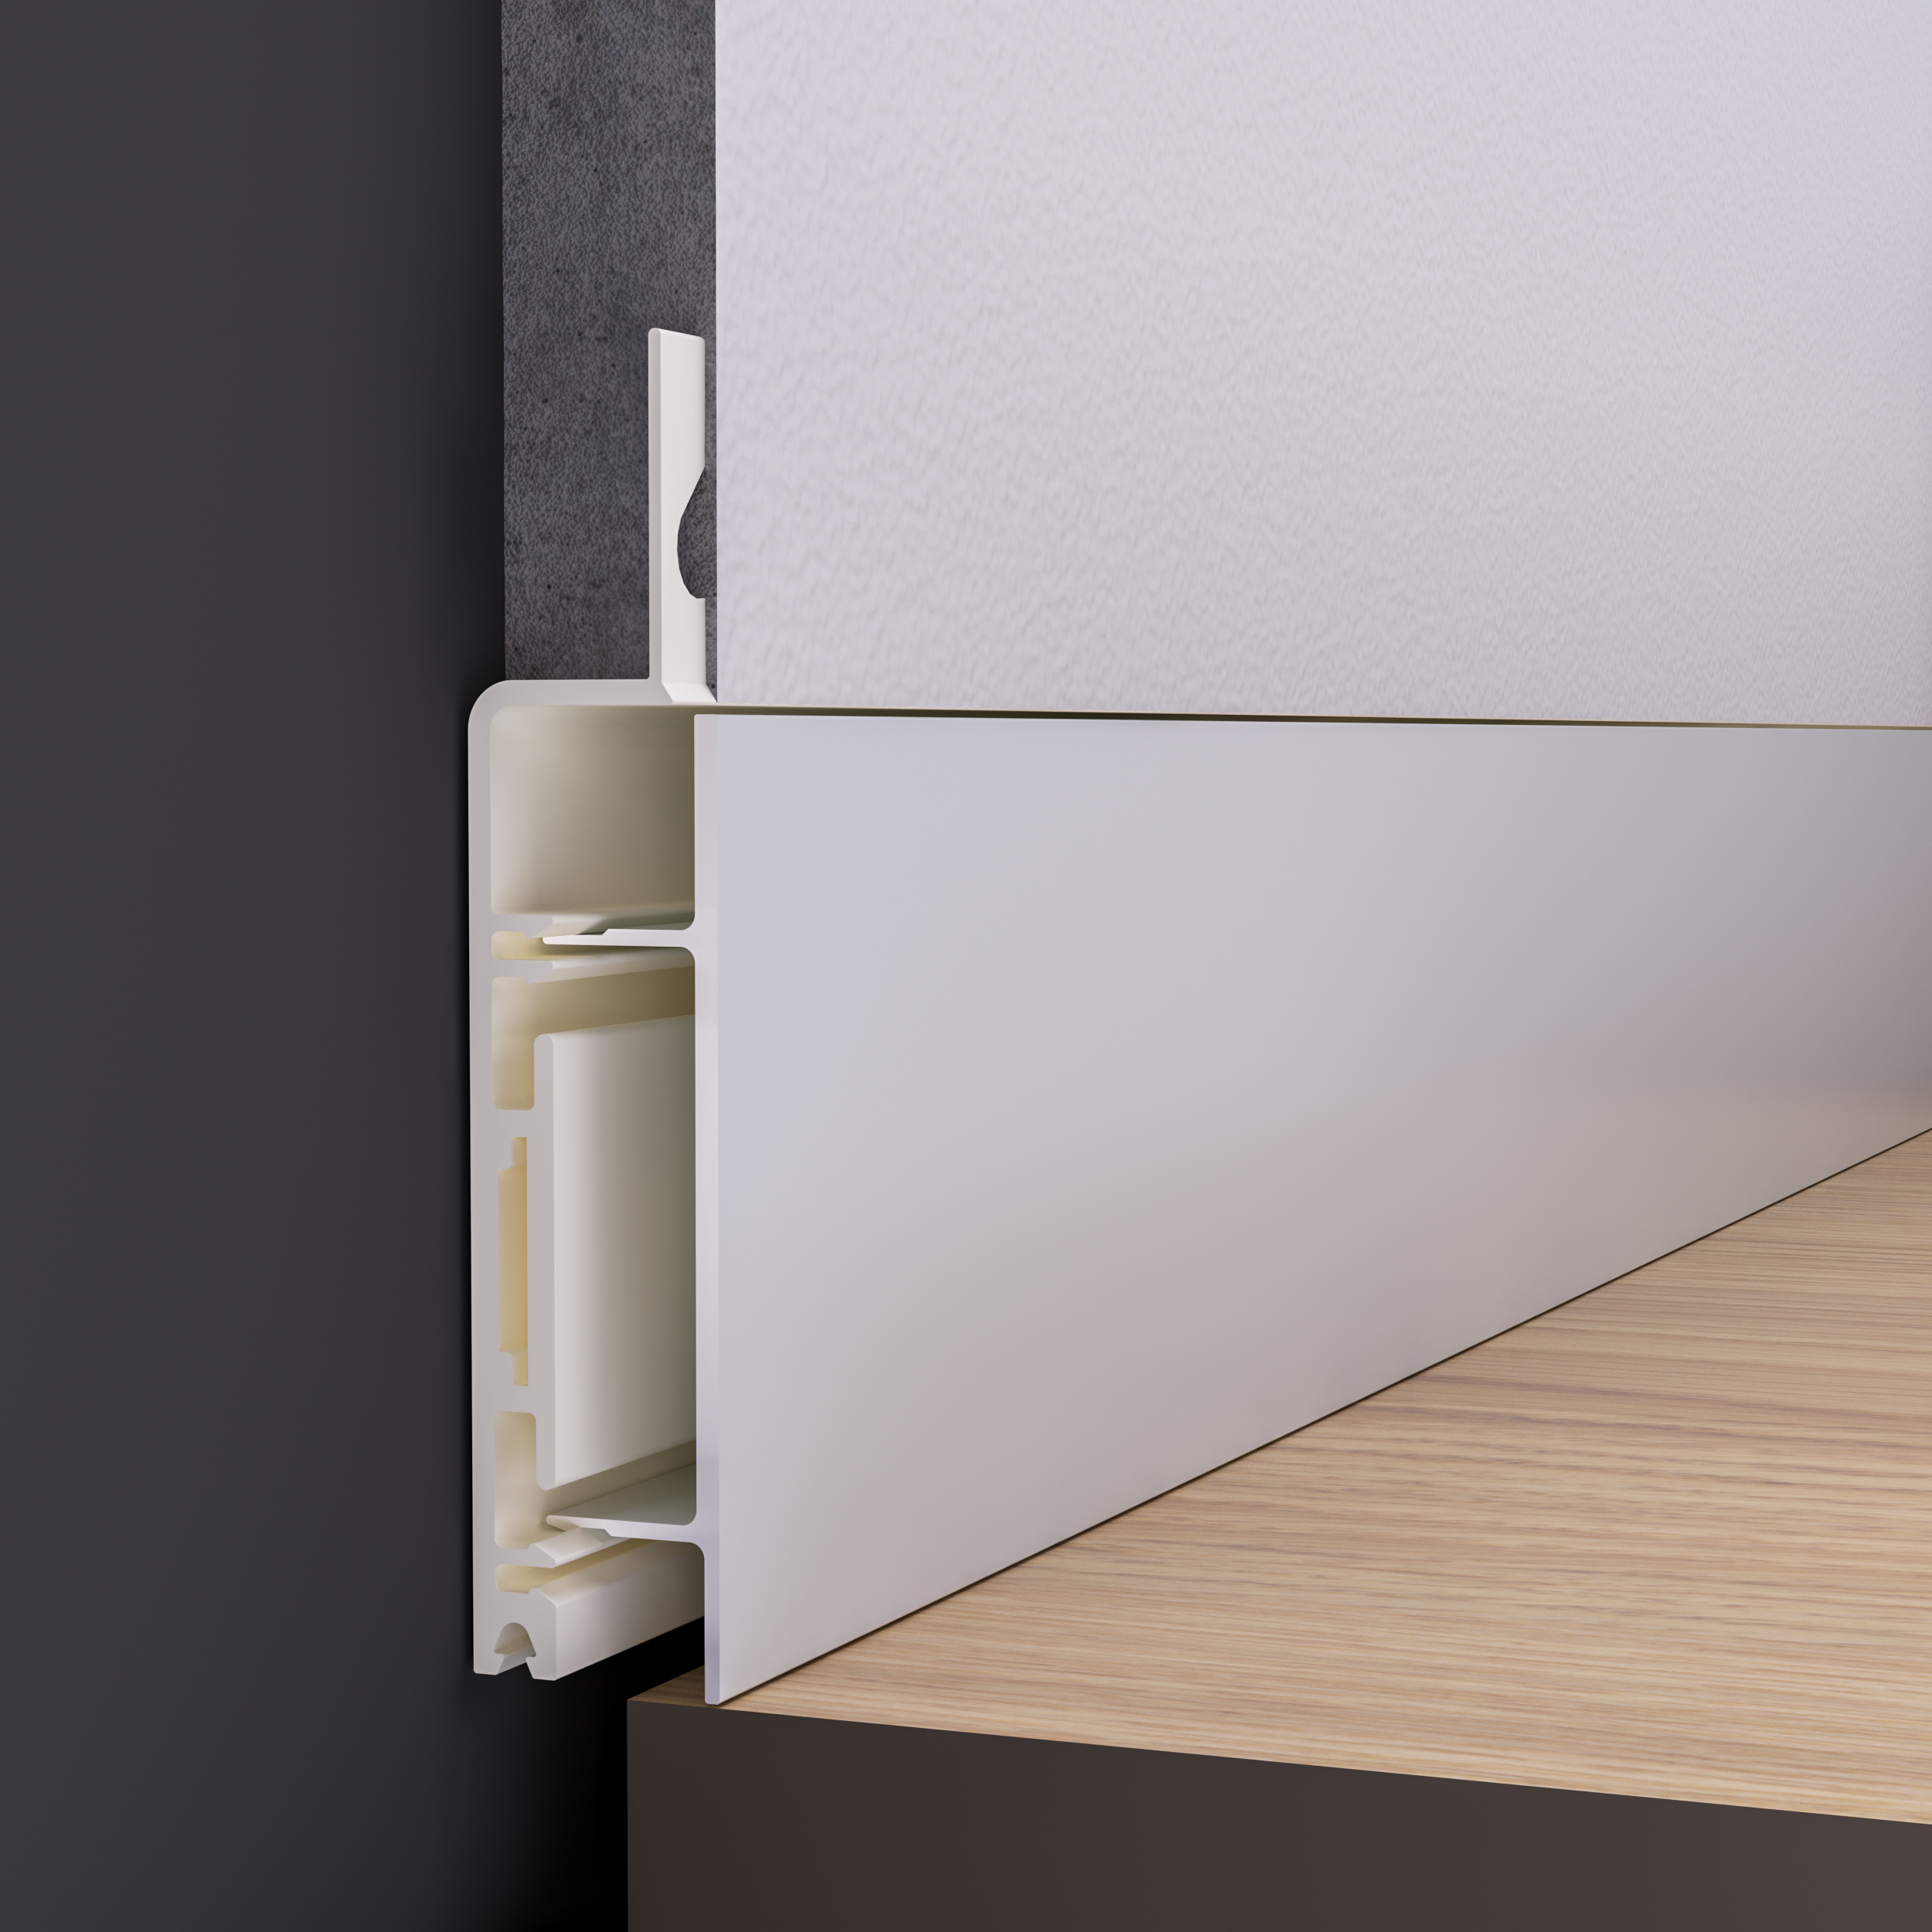 Skirting boards - AGS Systems | flush doors and skirting boards